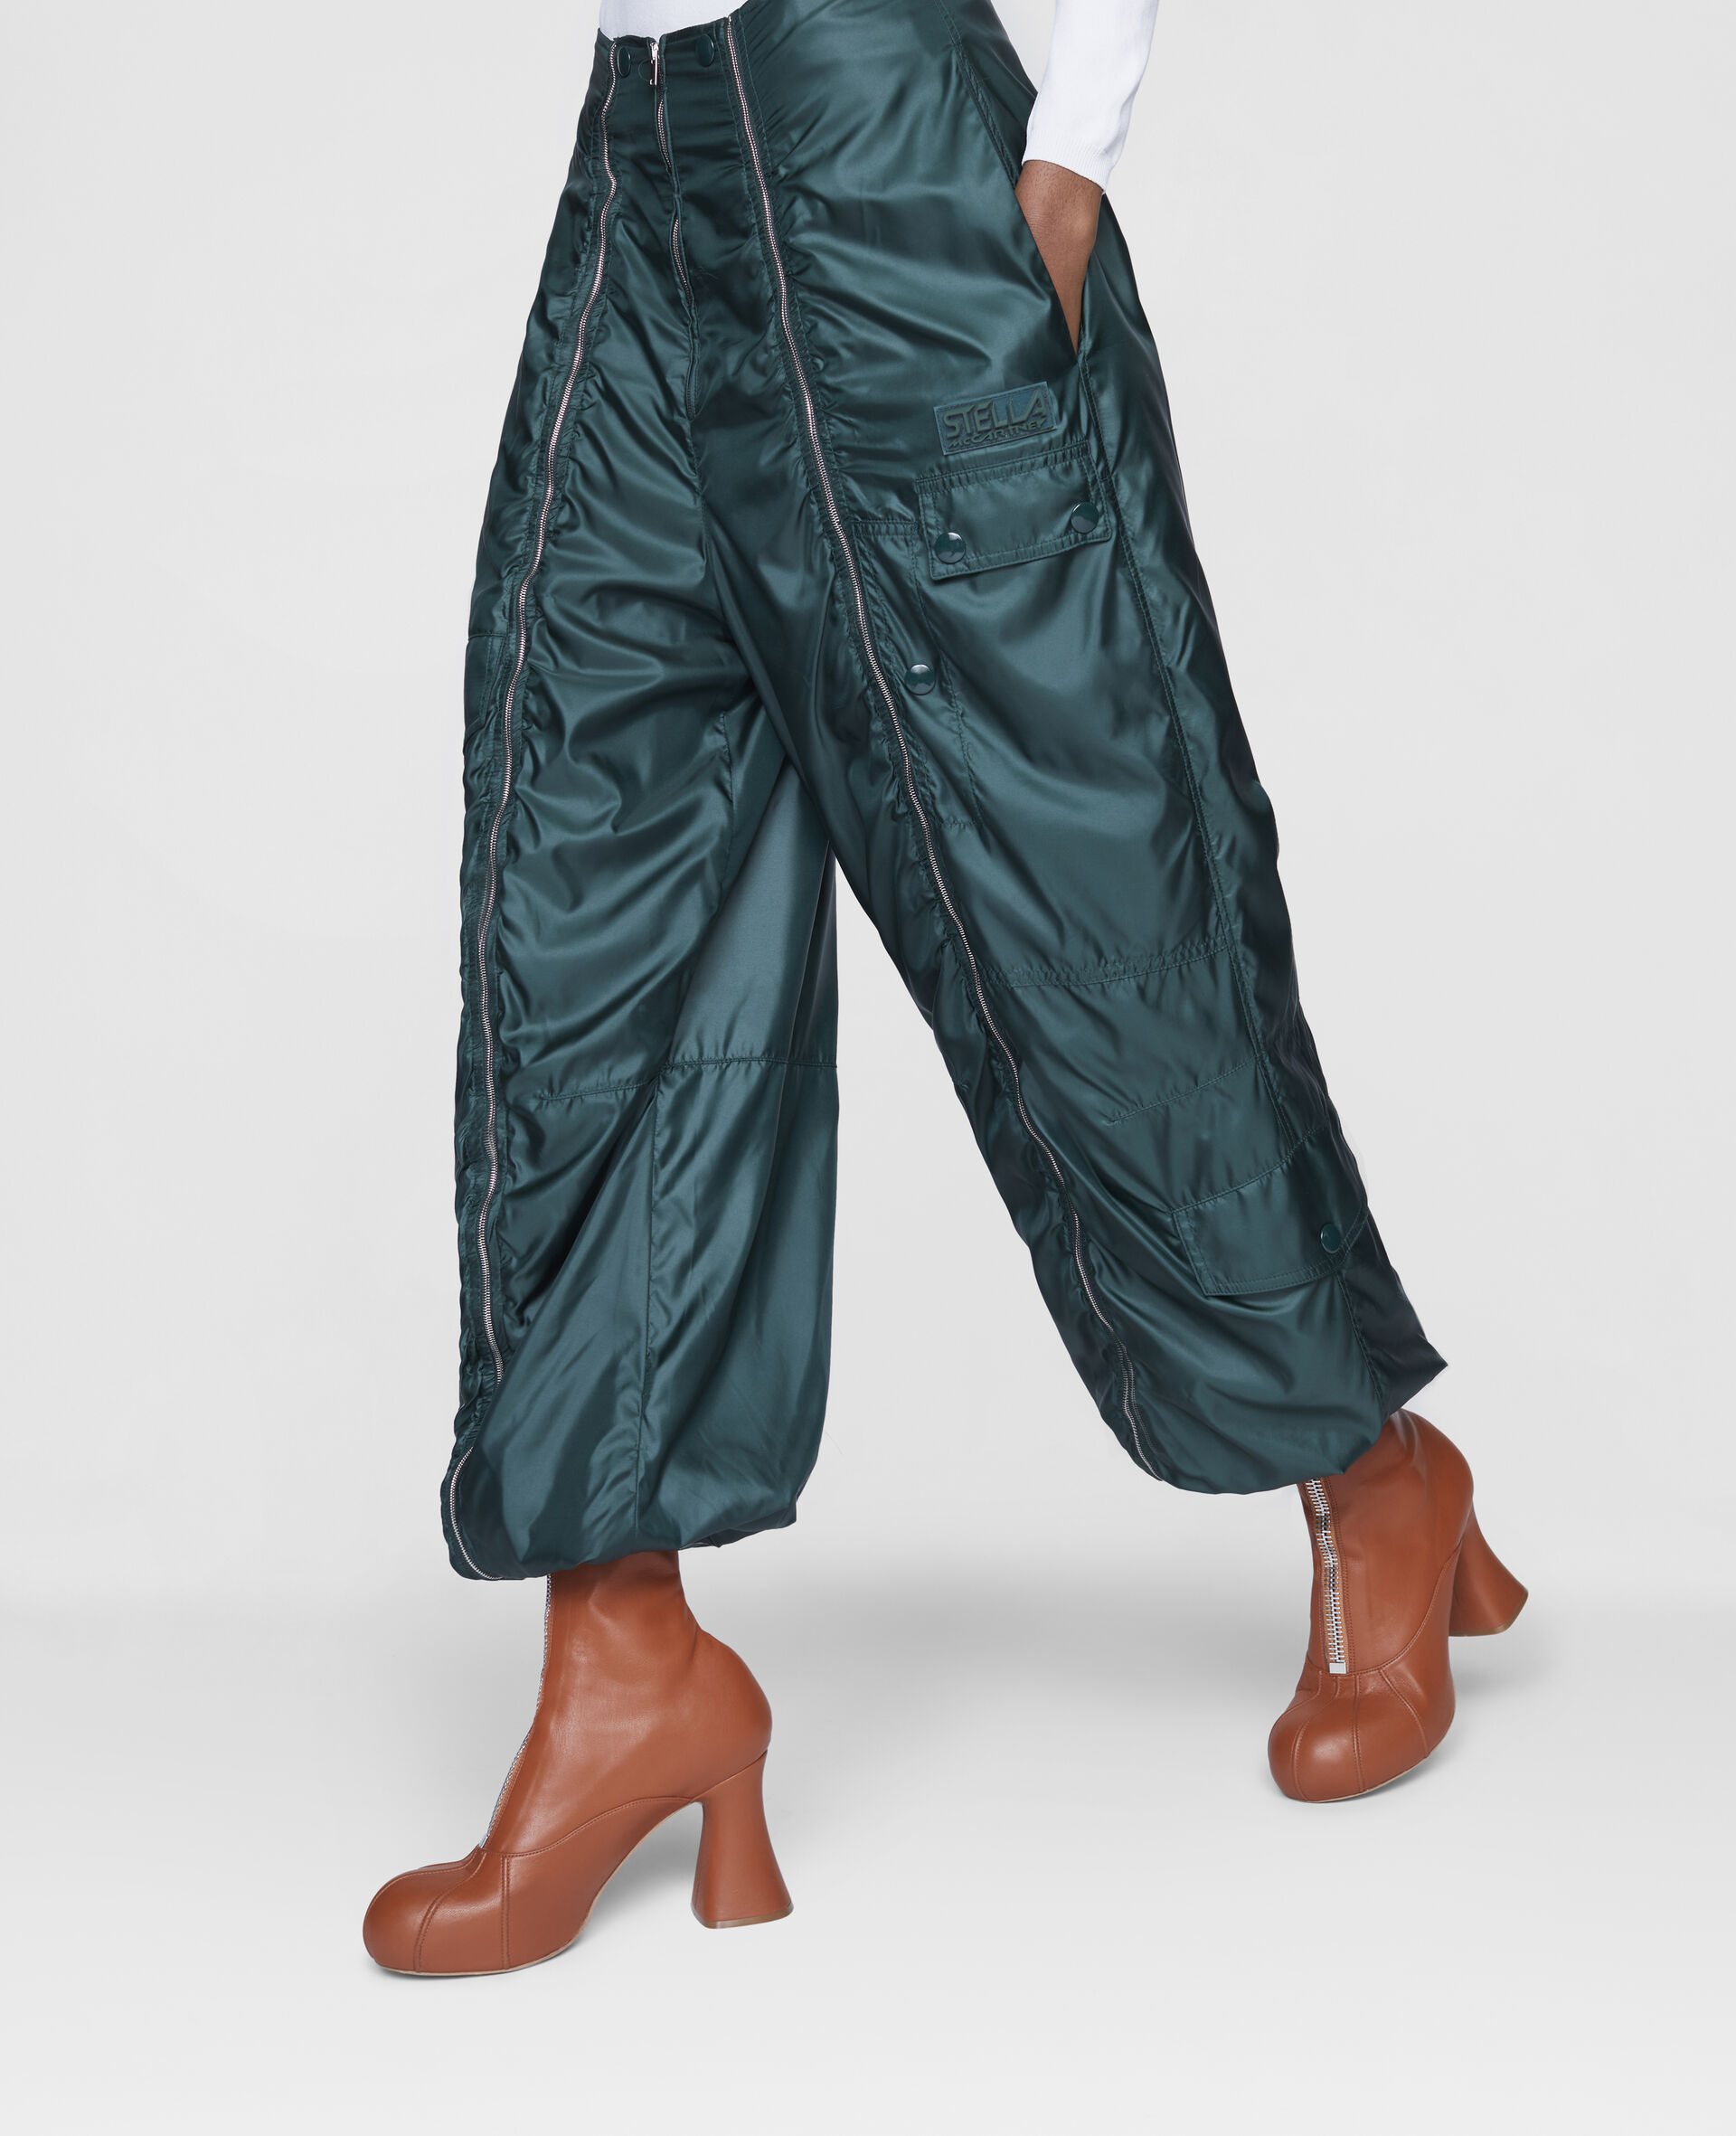 Nella Pants-Green-large image number 3